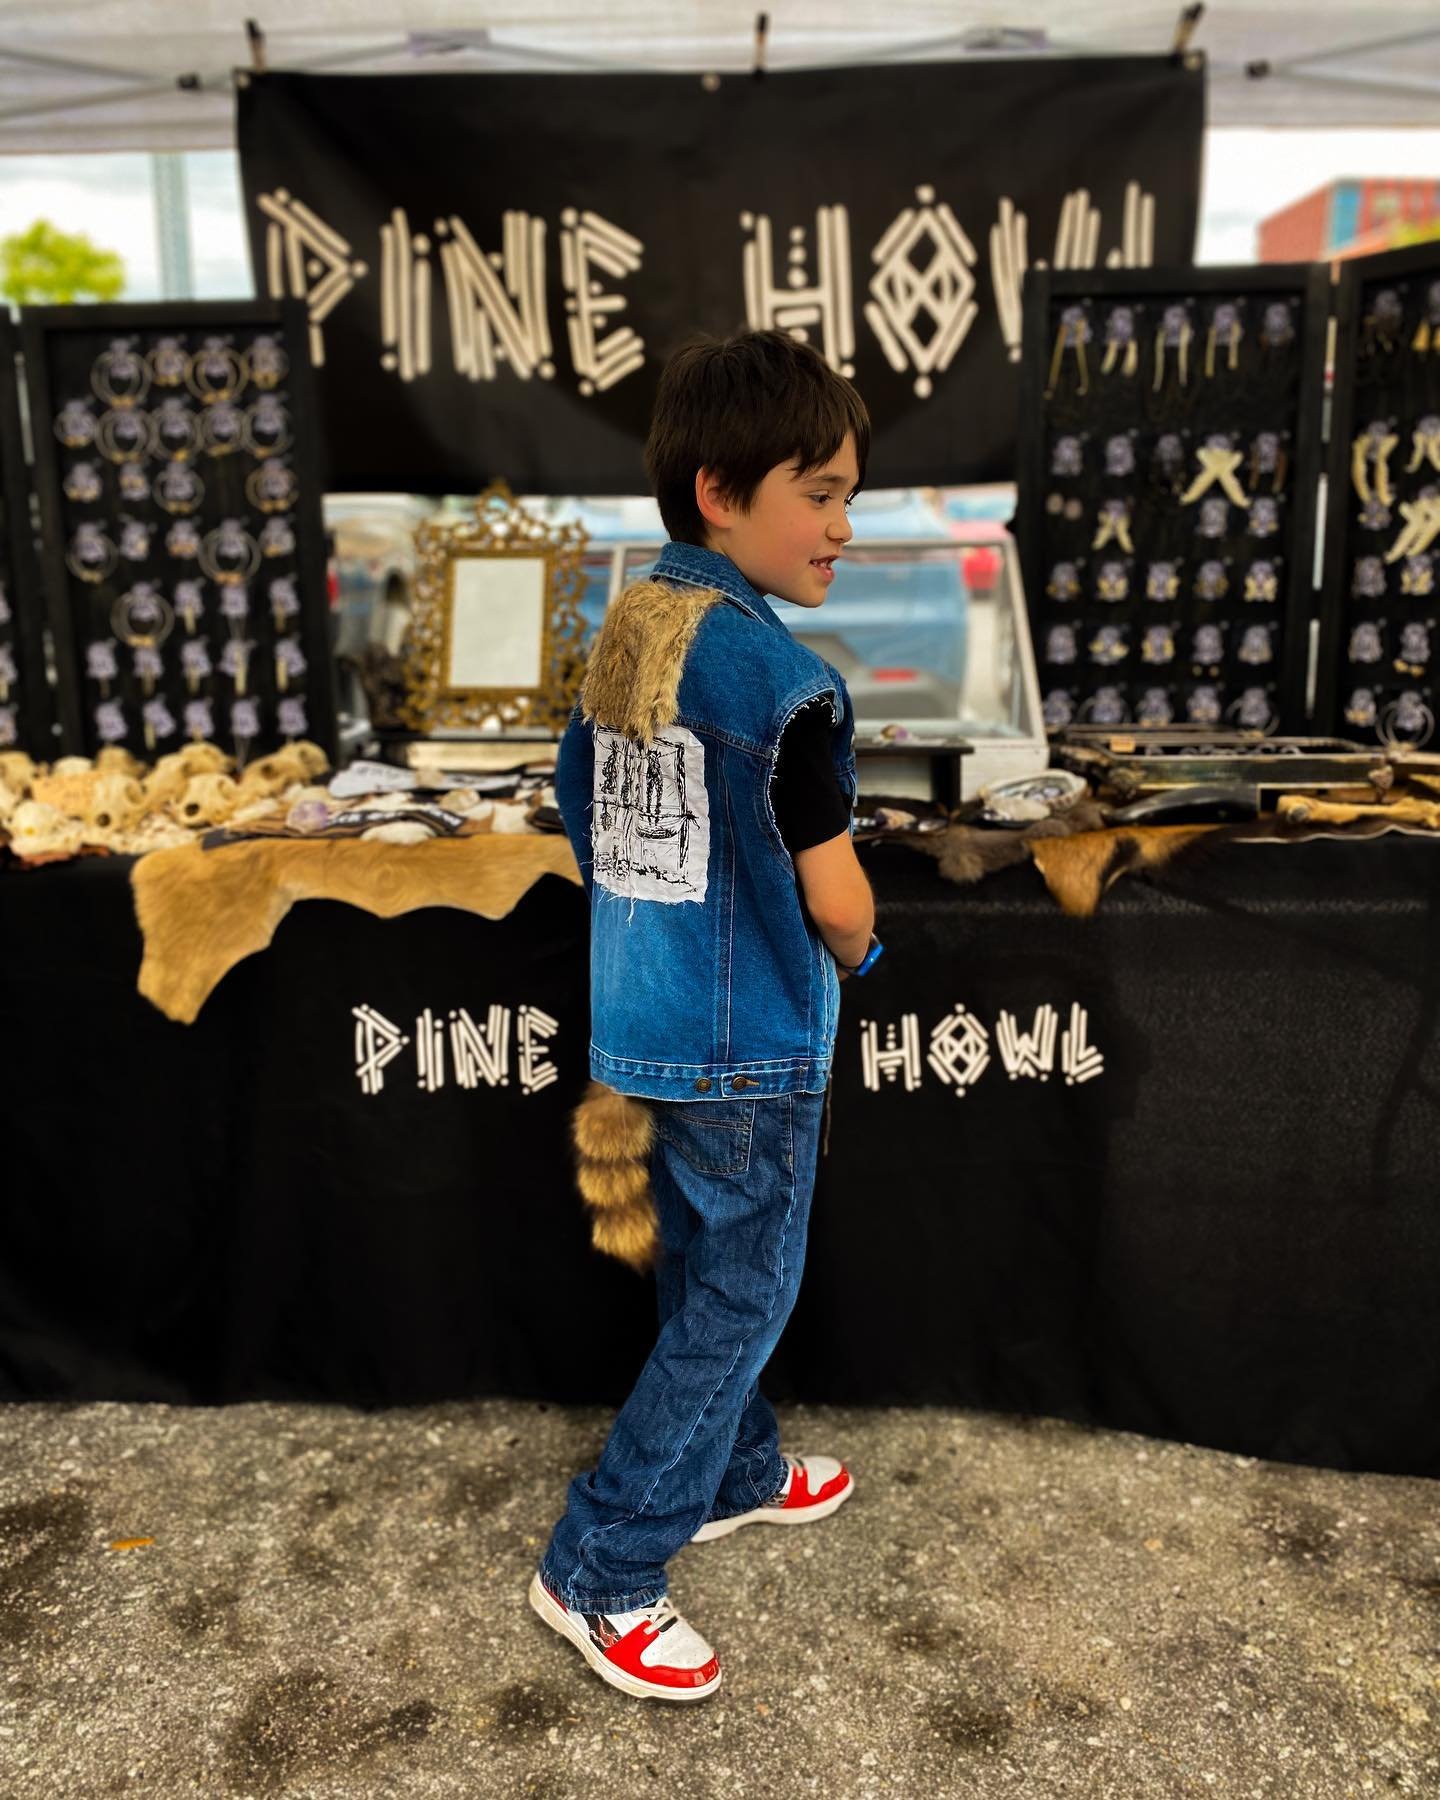 Thank you to all the sweet folks who came out to @yallmartsc today! This lil dude rocking a vest my partner made was too cute. I&rsquo;ll be back in Columbia for the @se_punk_flea_market in May! Follow @papa_wolfs to for more vests. 🖤
.
.
.
.
.
.
.
